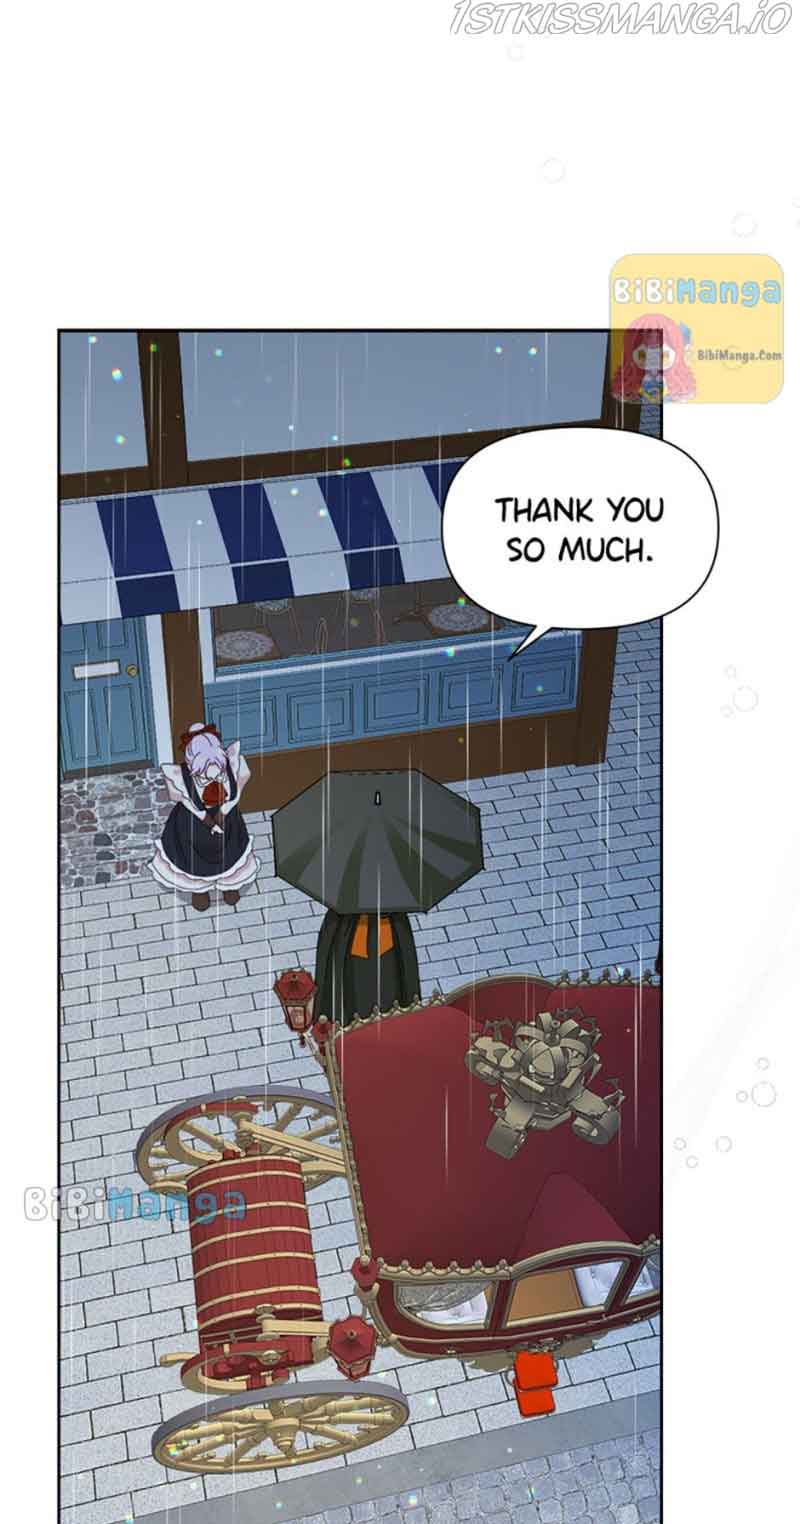 She came back and opened a dessert shop chapter 32